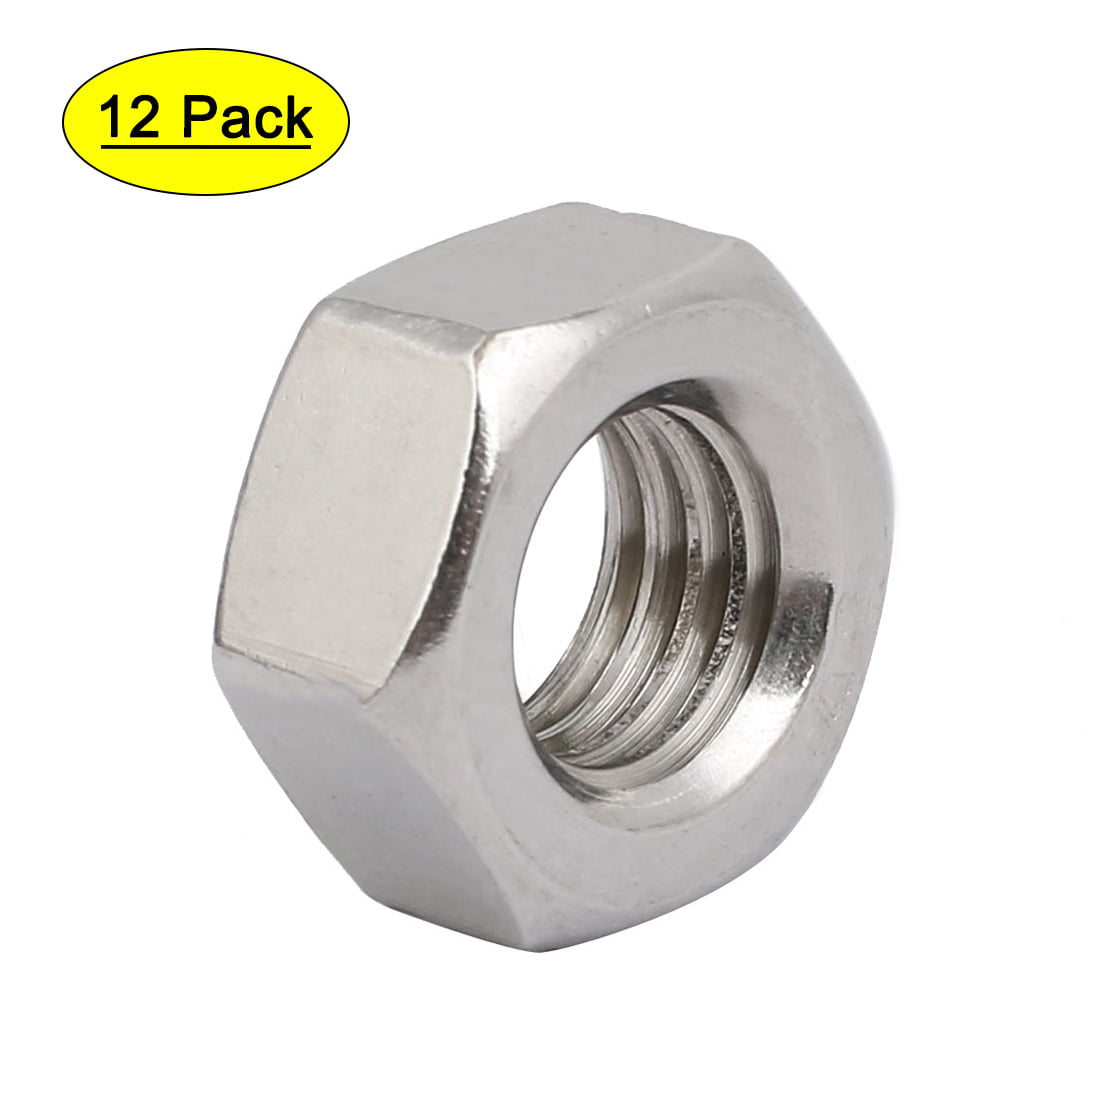 uxcell M12 x 1.75mm Pitch 304 Stainless Steel Slotted Hex Nuts Pack of 5 